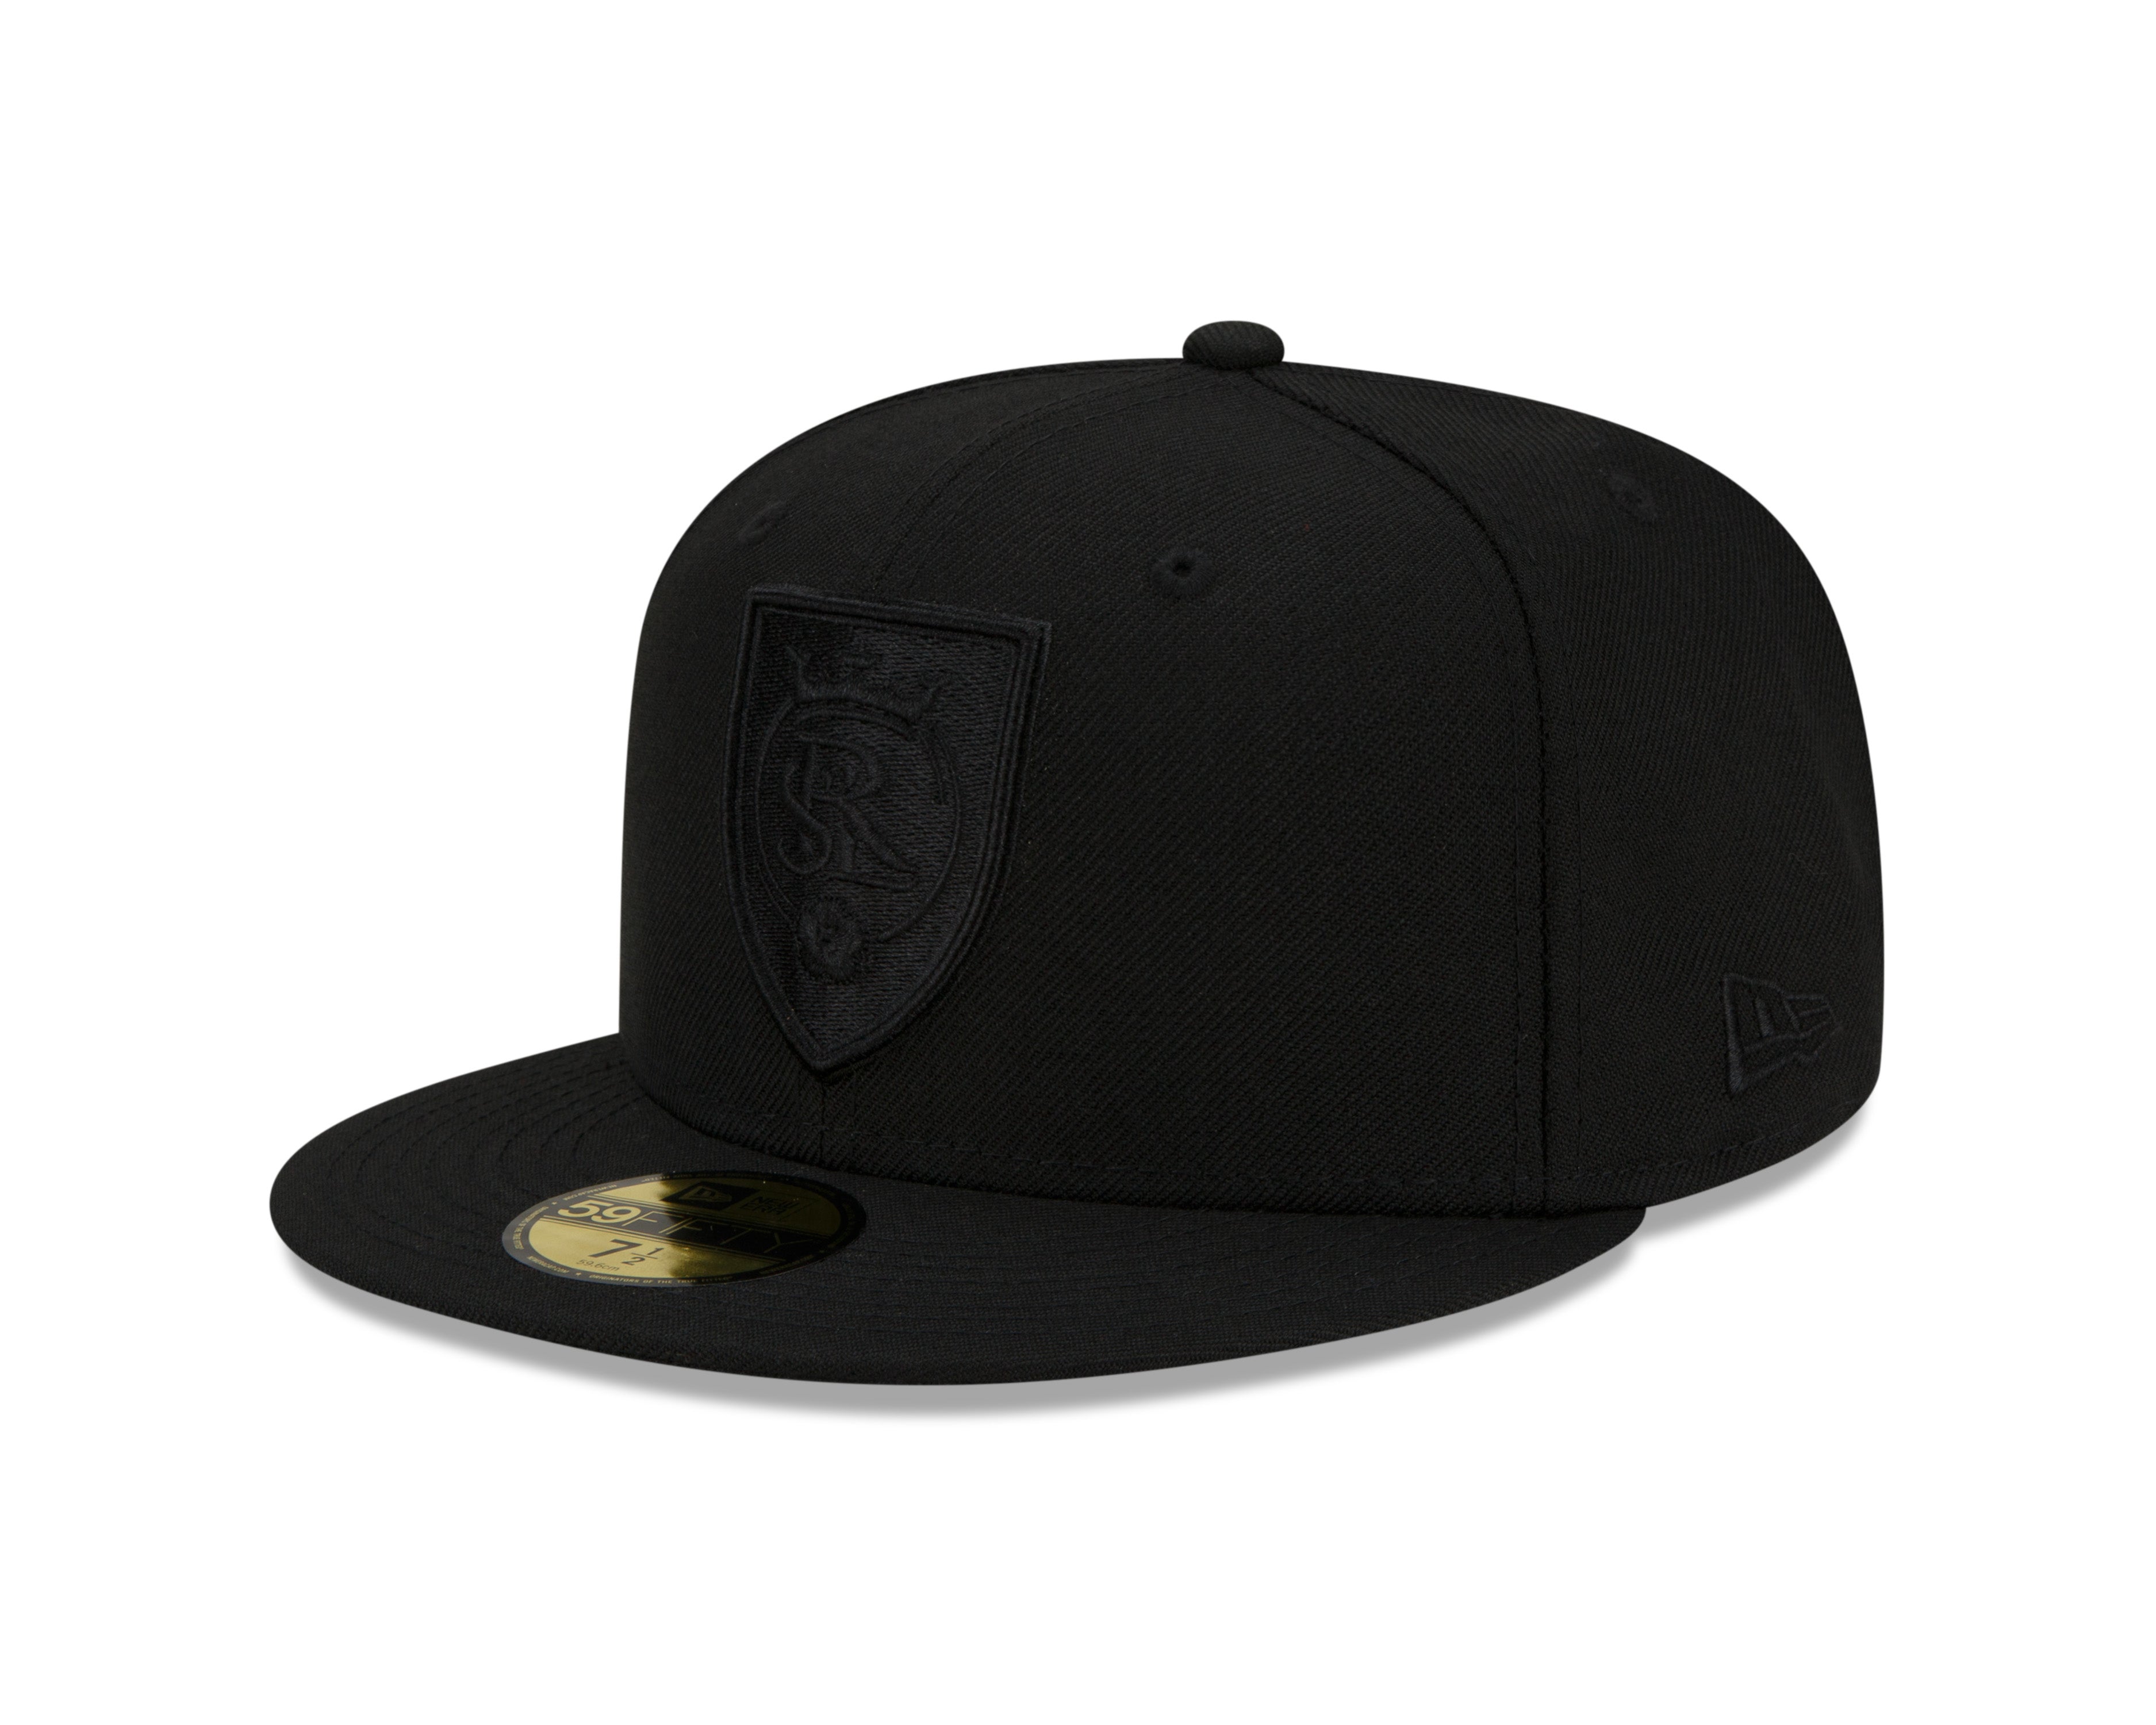 RSL New Era All Black Primary 59fifty Fitted Hat – The Team Store